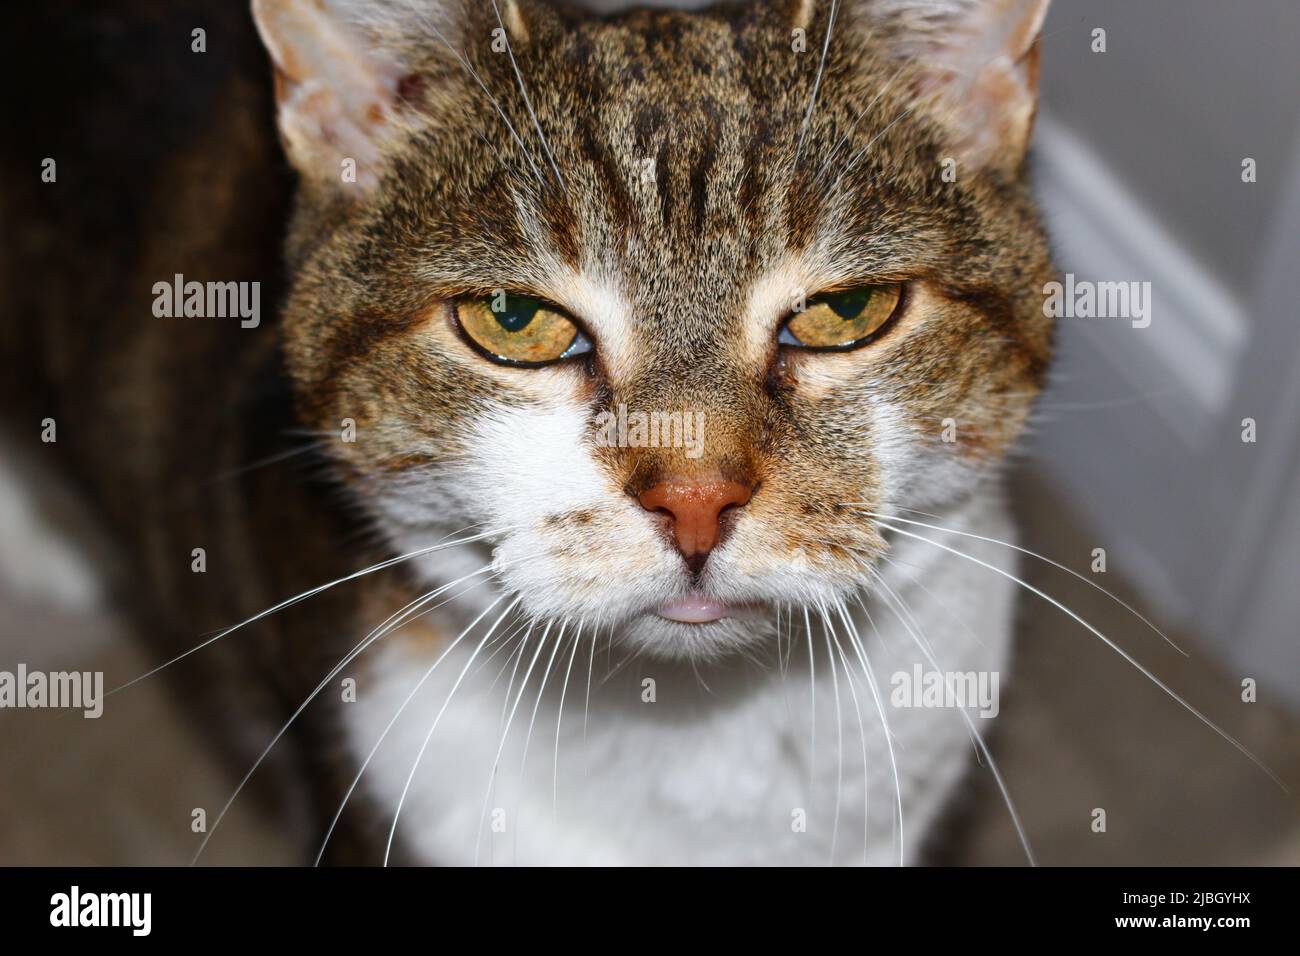 Close Up Face Of Cat. Upset Or Angry Mood Mode. Vintage Tone Filter Color  Style. Stock Photo, Picture and Royalty Free Image. Image 67988424.